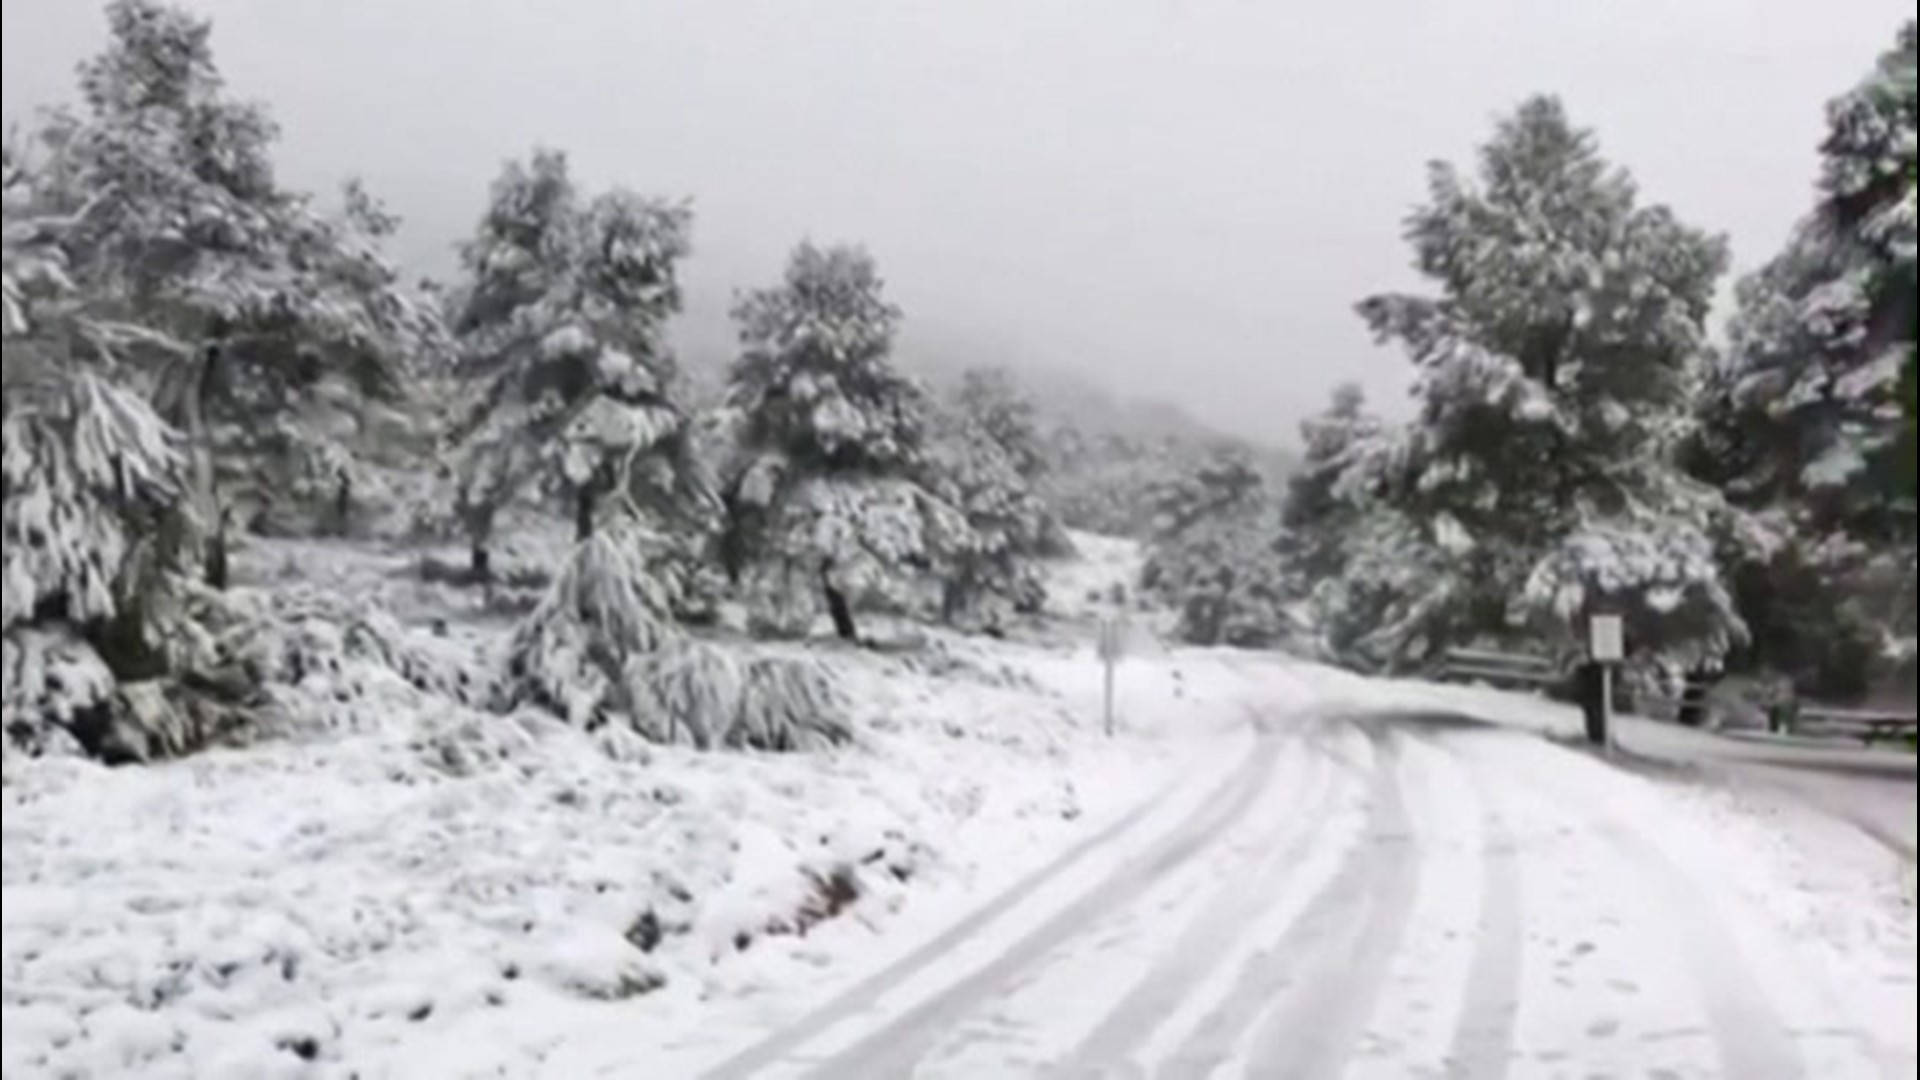 At least three people were killed after Storm Gloria hammered parts of Spain with heavy snow and cold temperatures on Jan. 19 and 20.